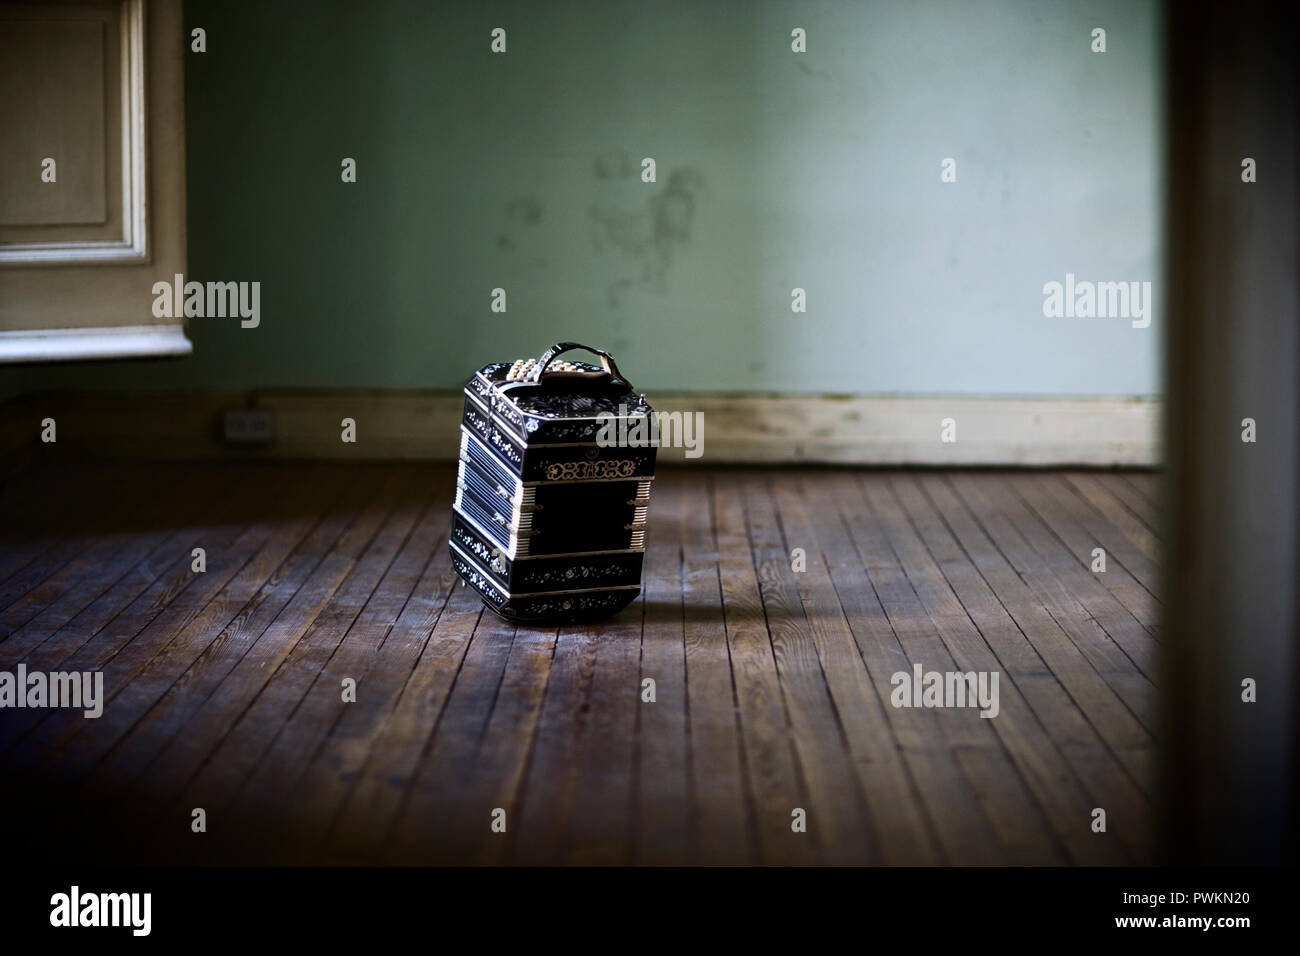 View of a case placed on a hardwood flooring. Stock Photo